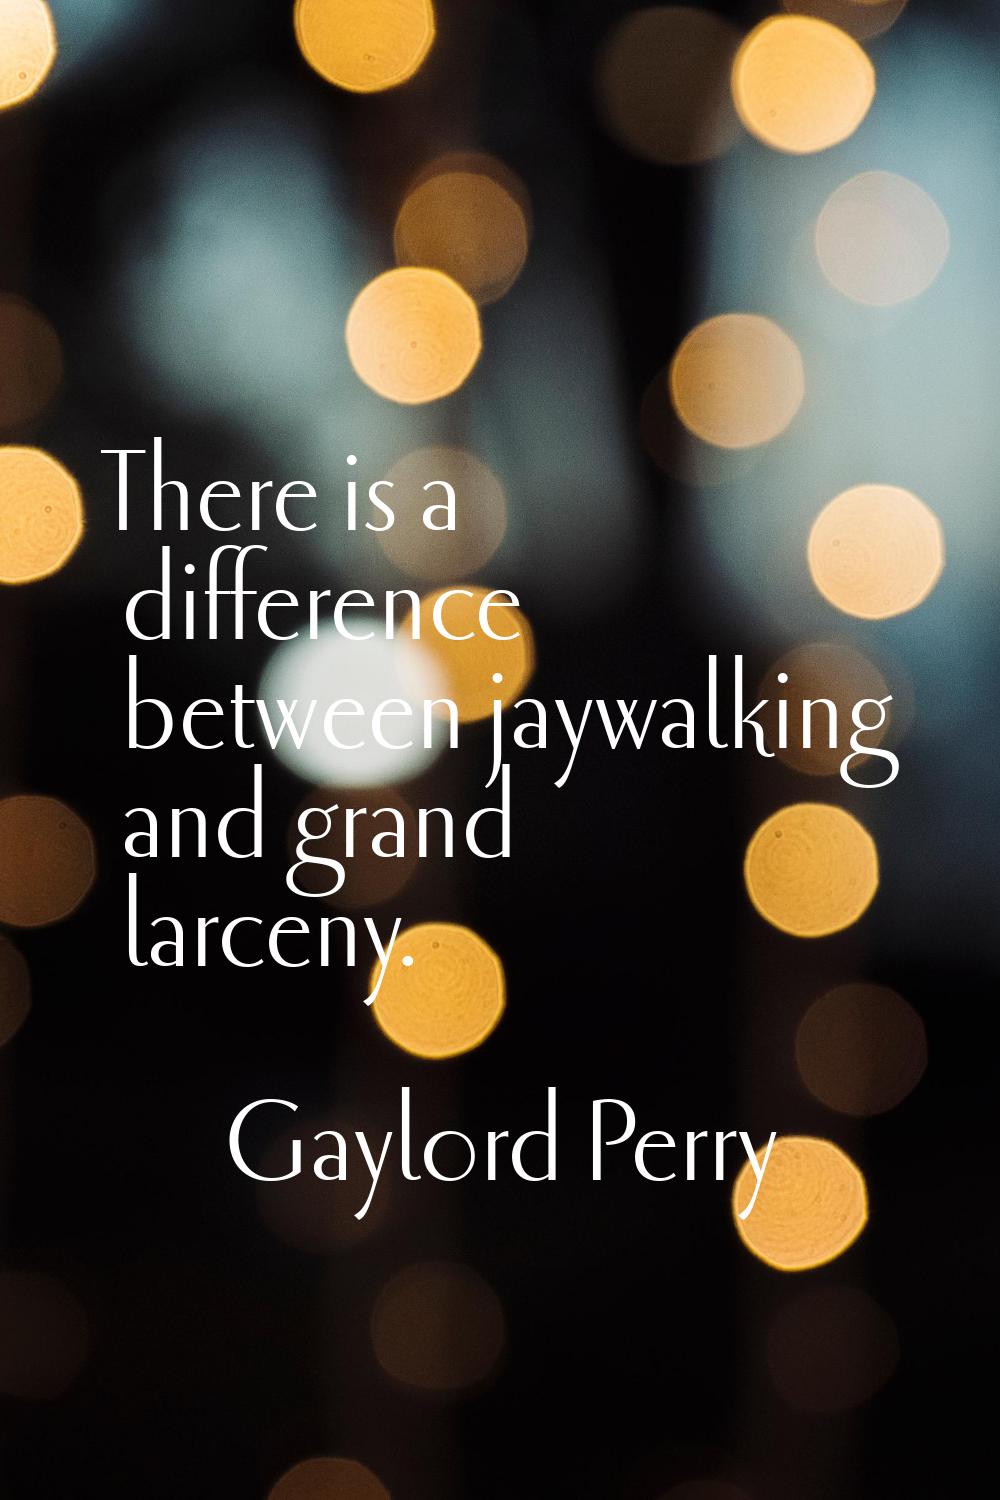 There is a difference between jaywalking and grand larceny.